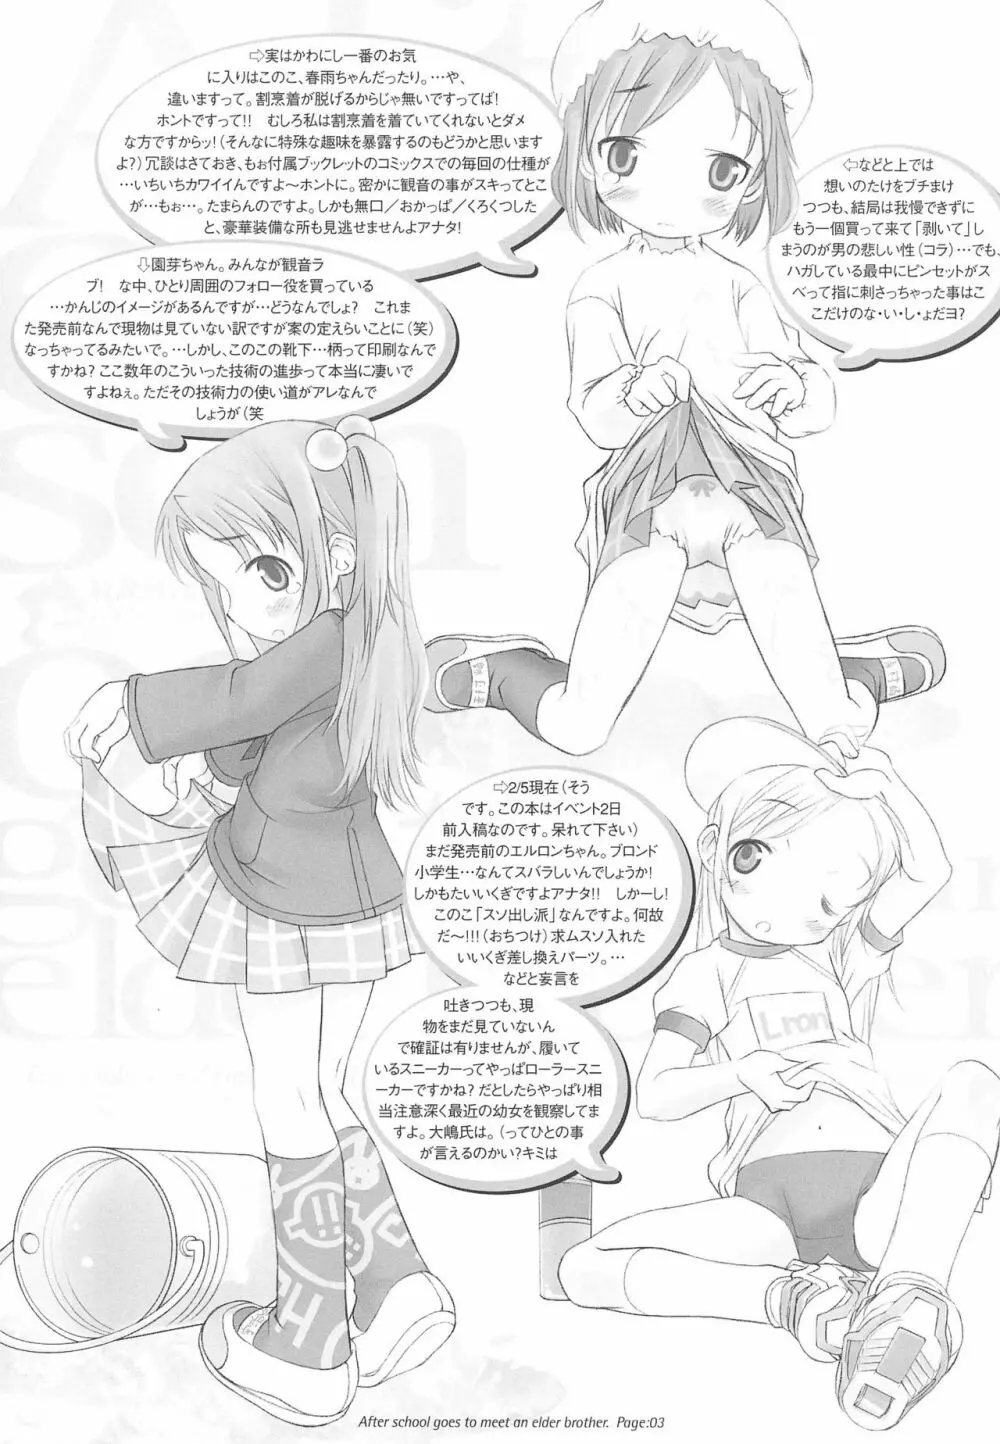 After School Goes To Meet An Elder Brother 放課後はお兄ちゃんに逢いに行きます。 - page3